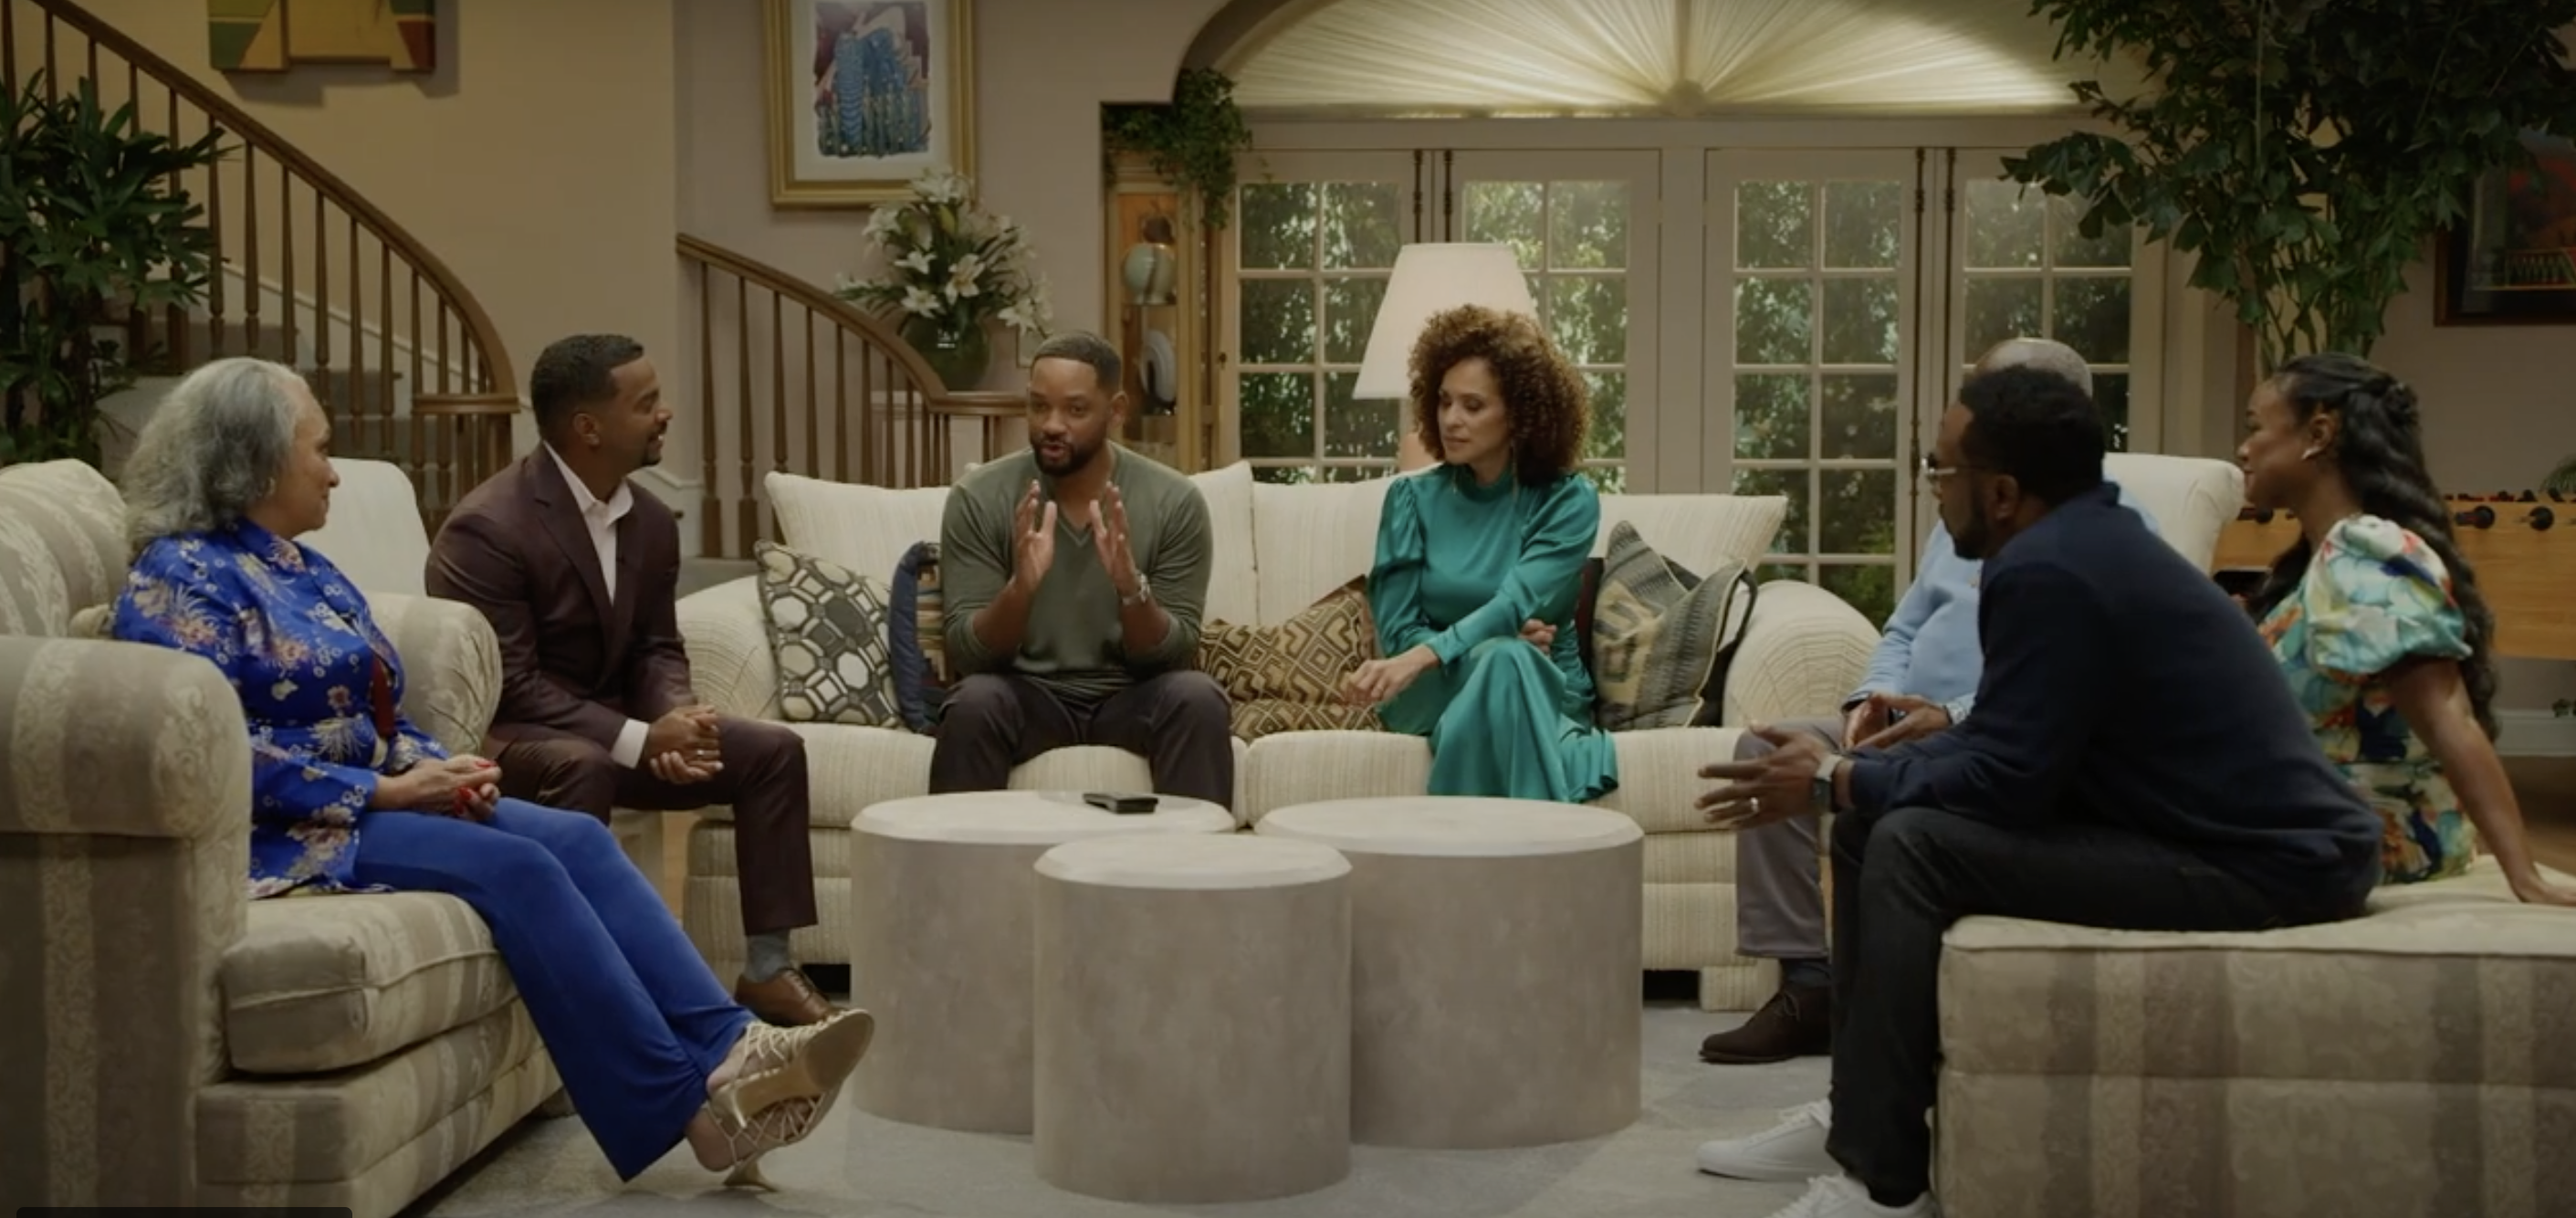 The 'Fresh Prince of Bel-Air' Reunion Special Receives Premiere Date